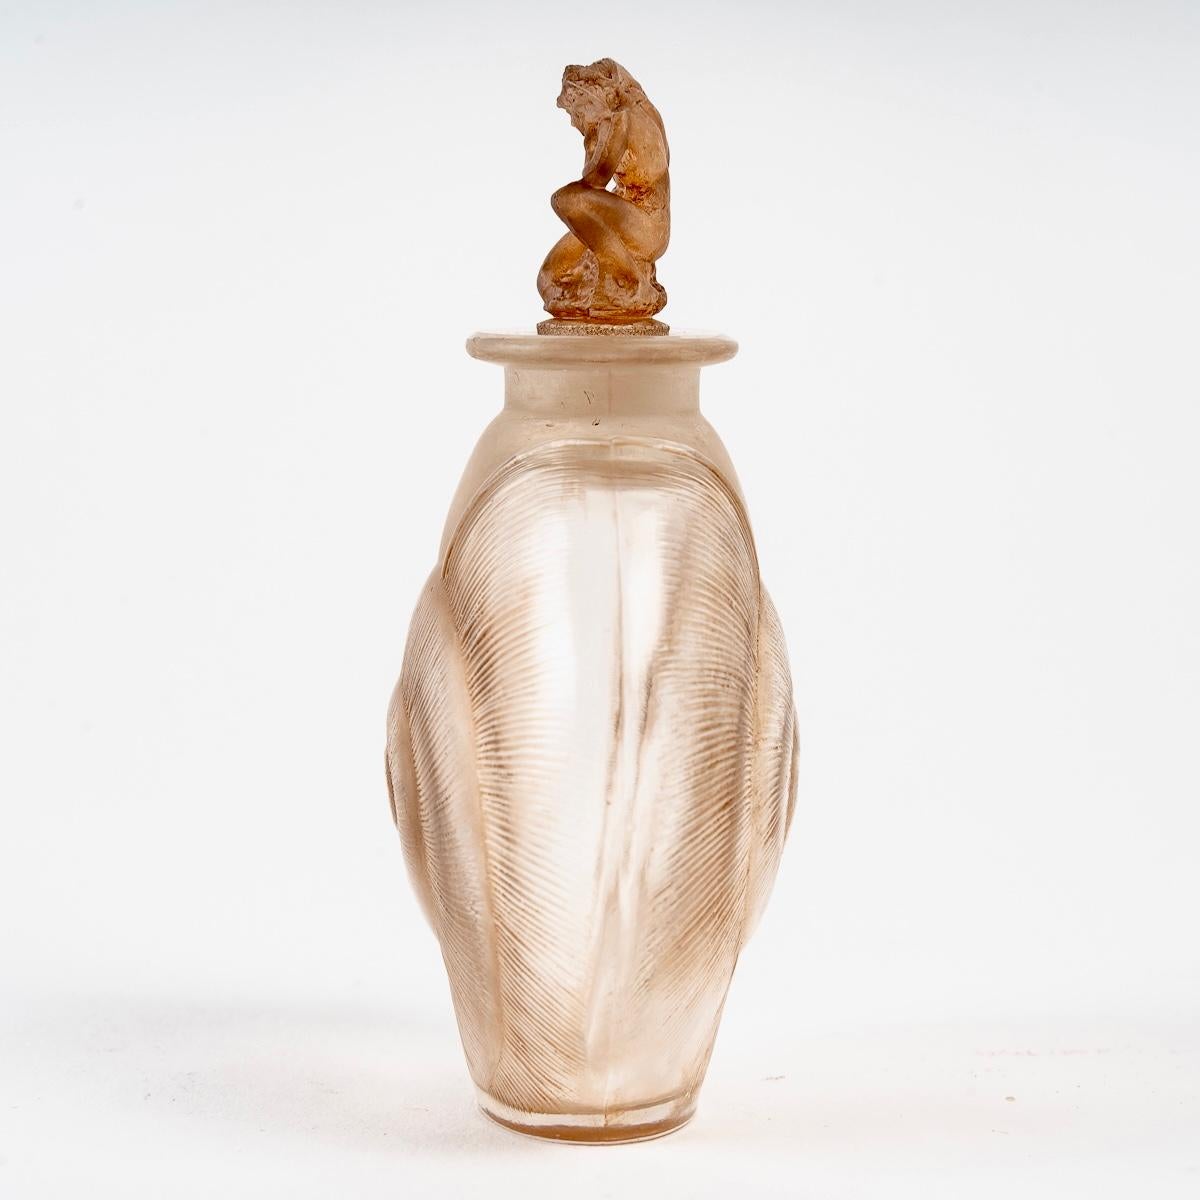 Molded 1920 René Lalique, Perfume Bottle Amphitrite Frosted Glass with Sepia Patina